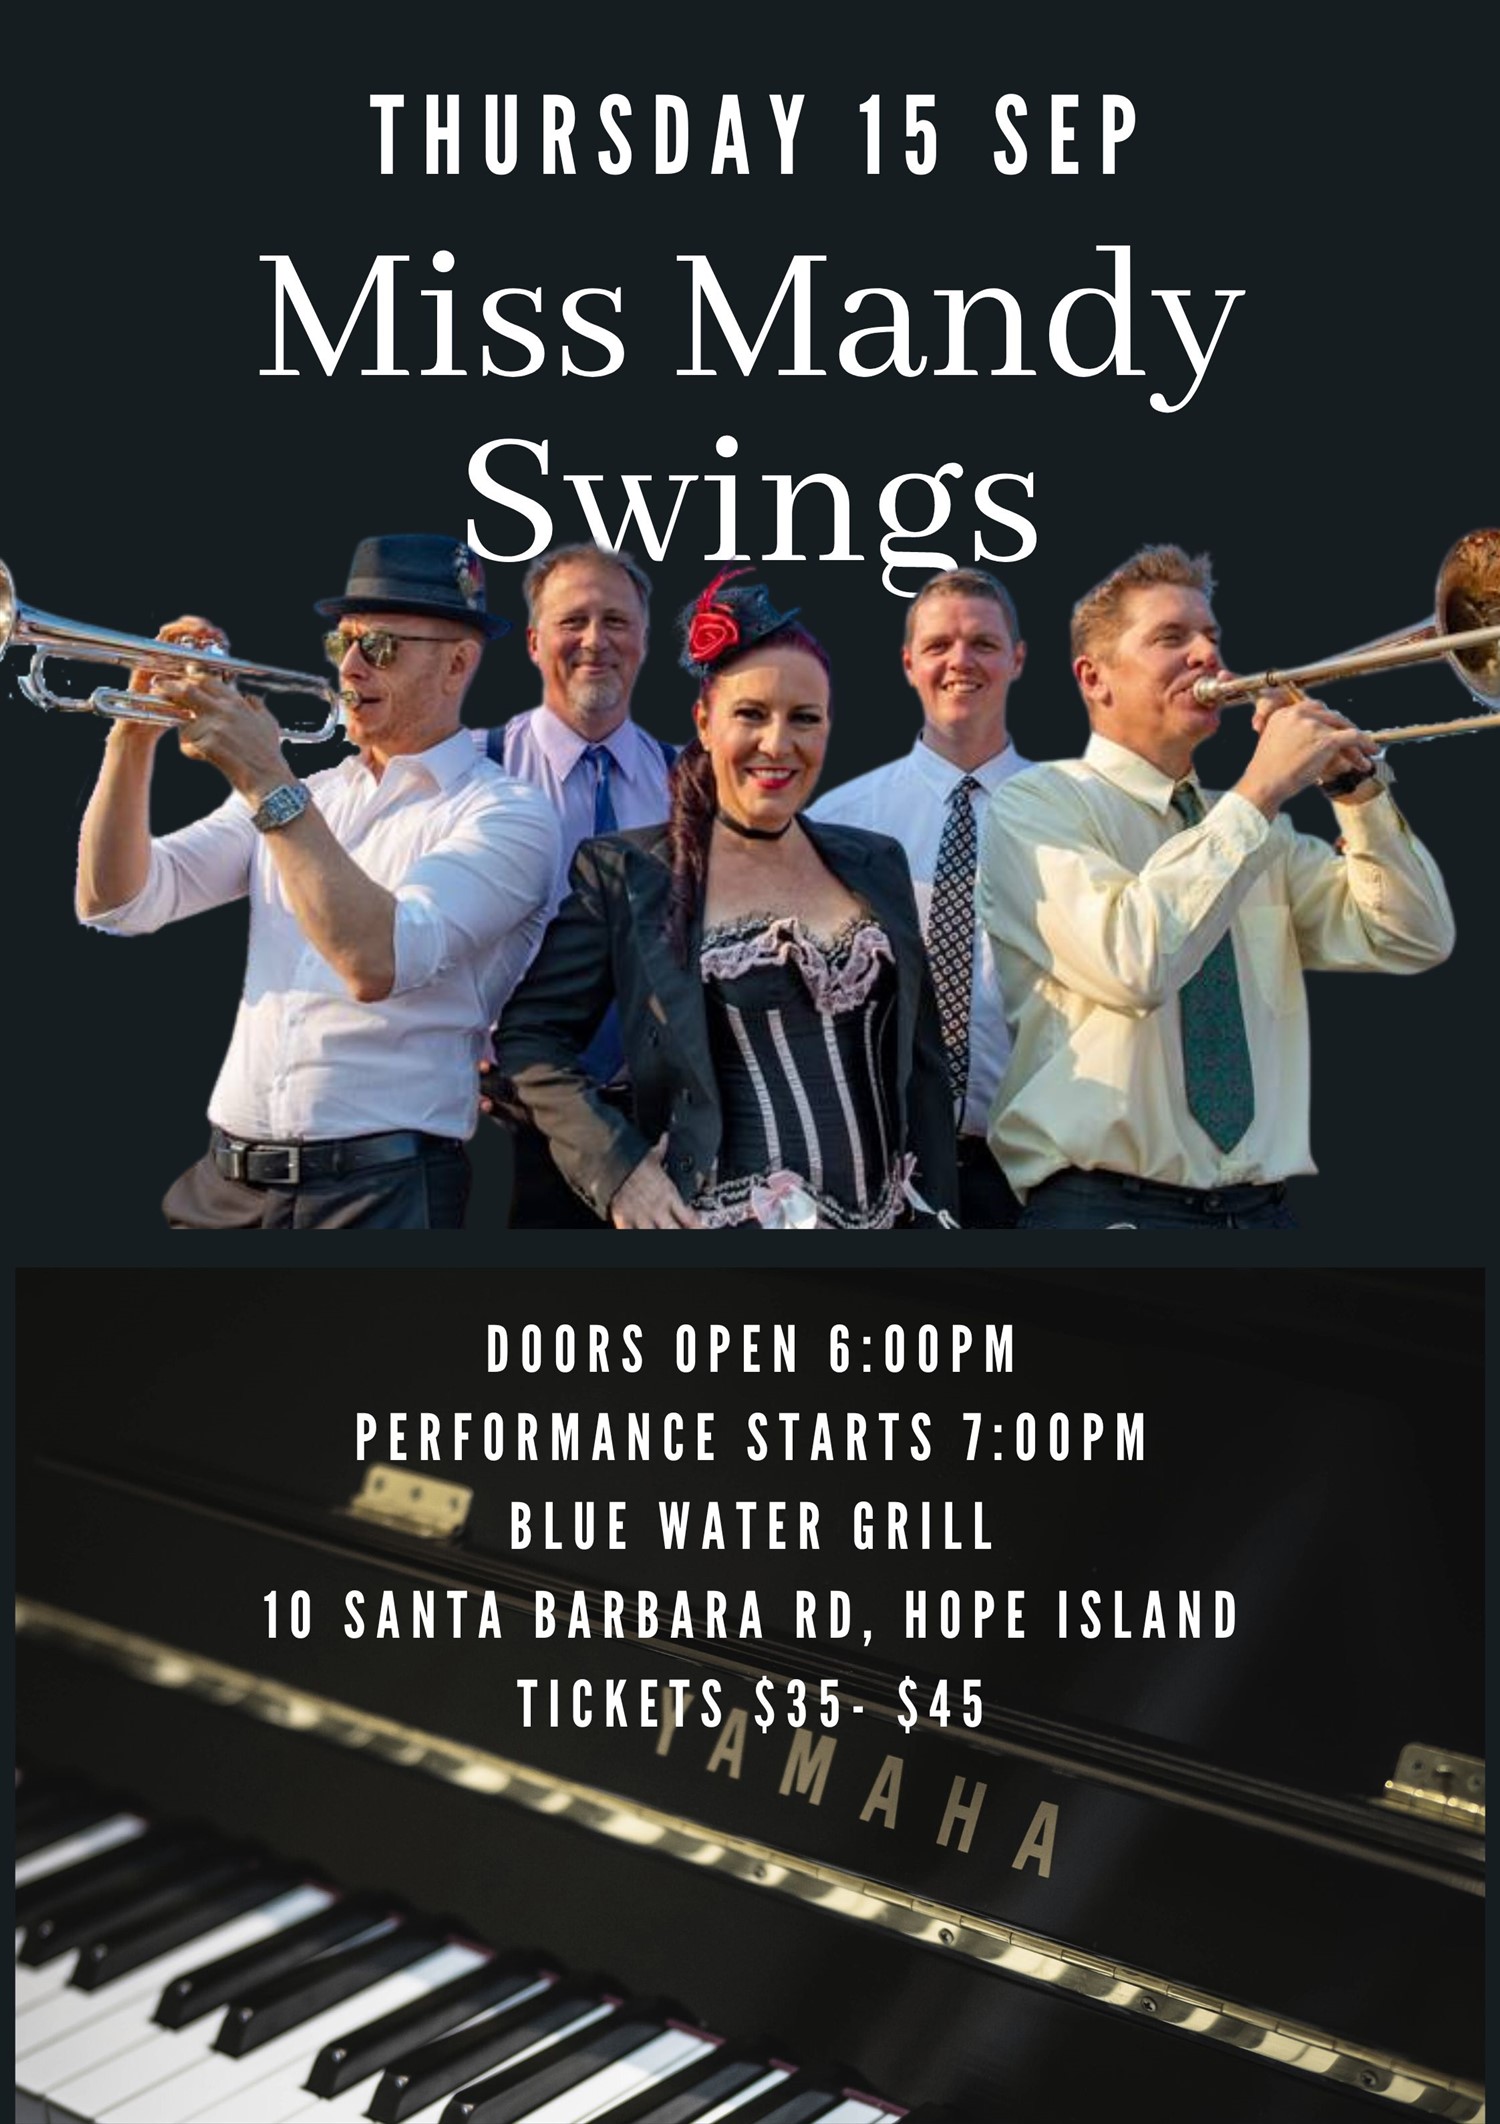 Miss Mandy Swings  on Sep 15, 18:00@Hope Island Jazz - Blue Water Grill - Buy tickets and Get information on  